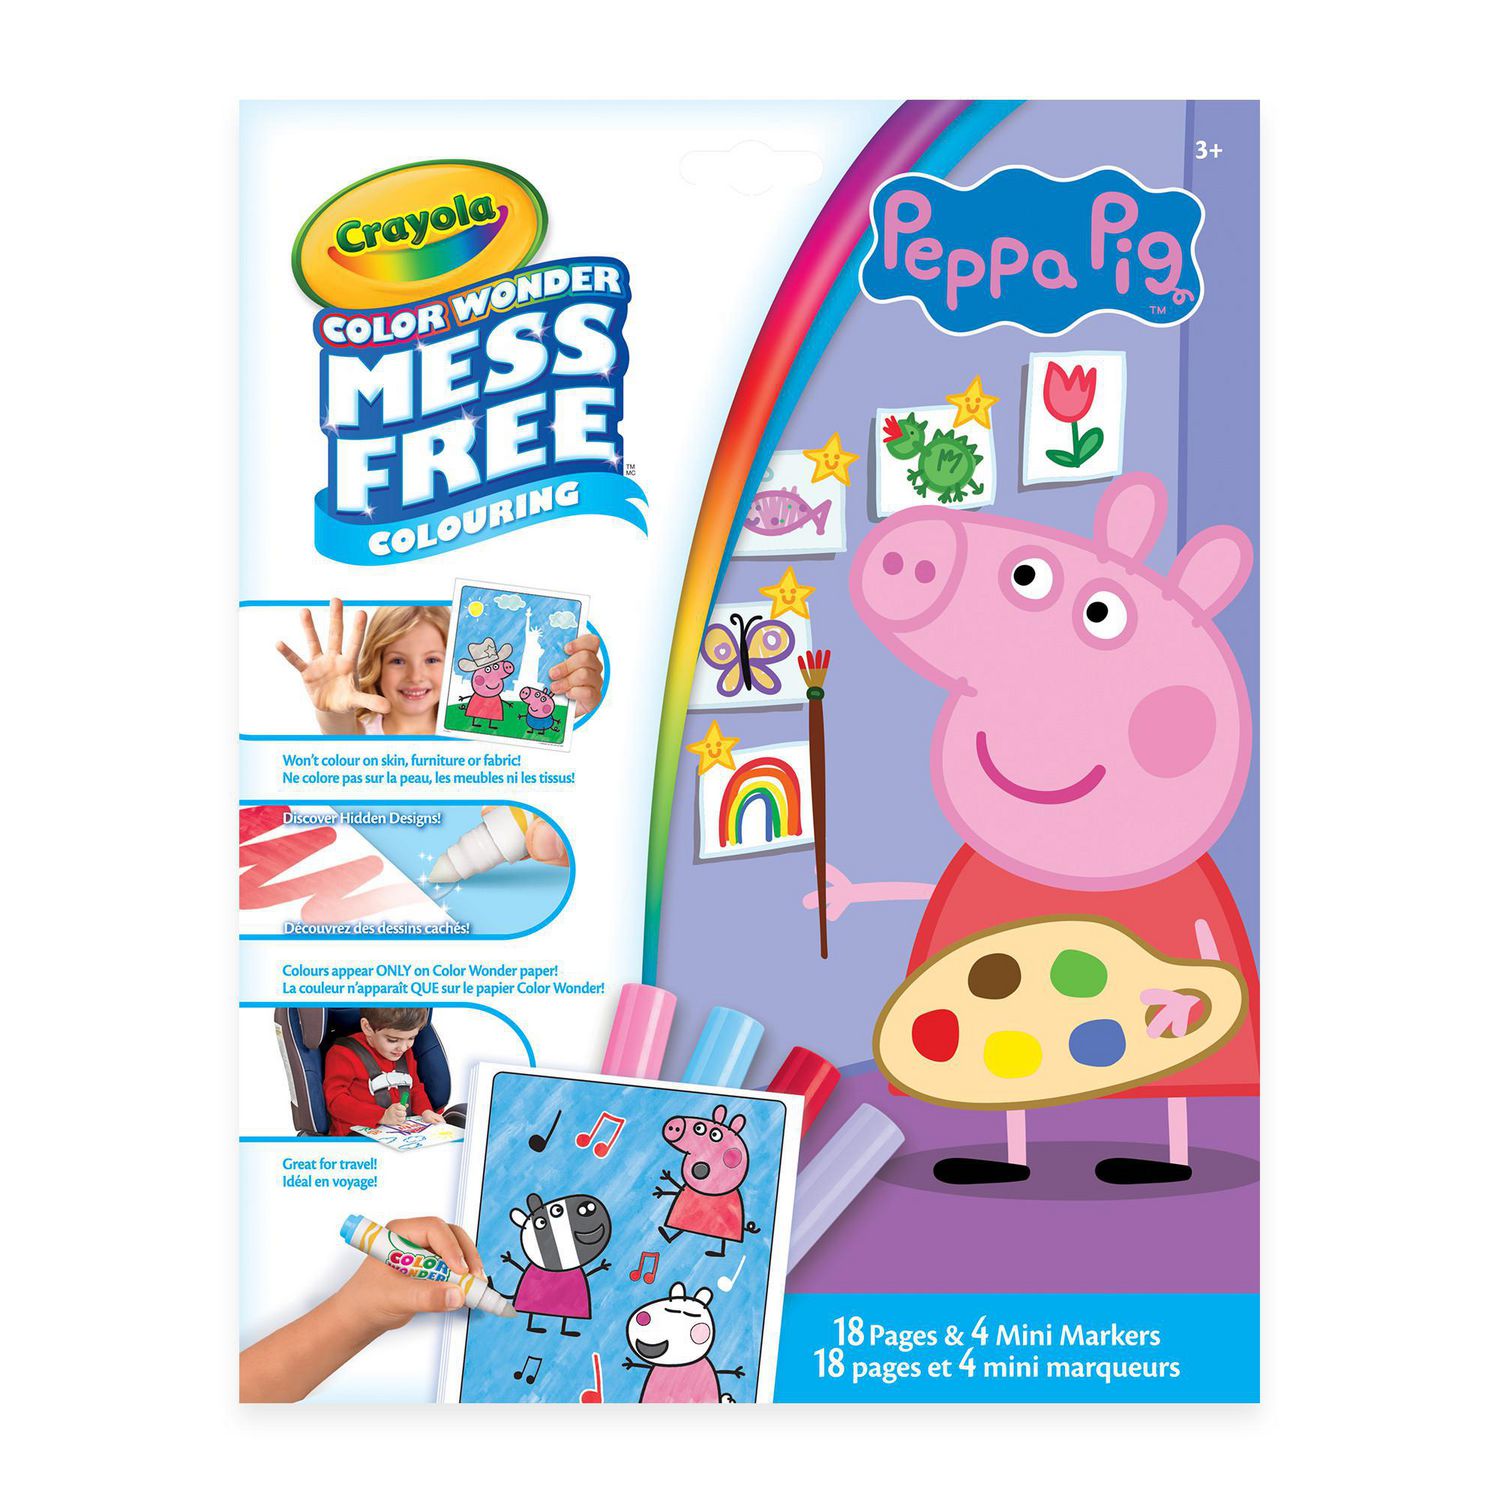 Crayola Color Wonder Mess-Free Colouring Pages & Mini Markers, Peppa